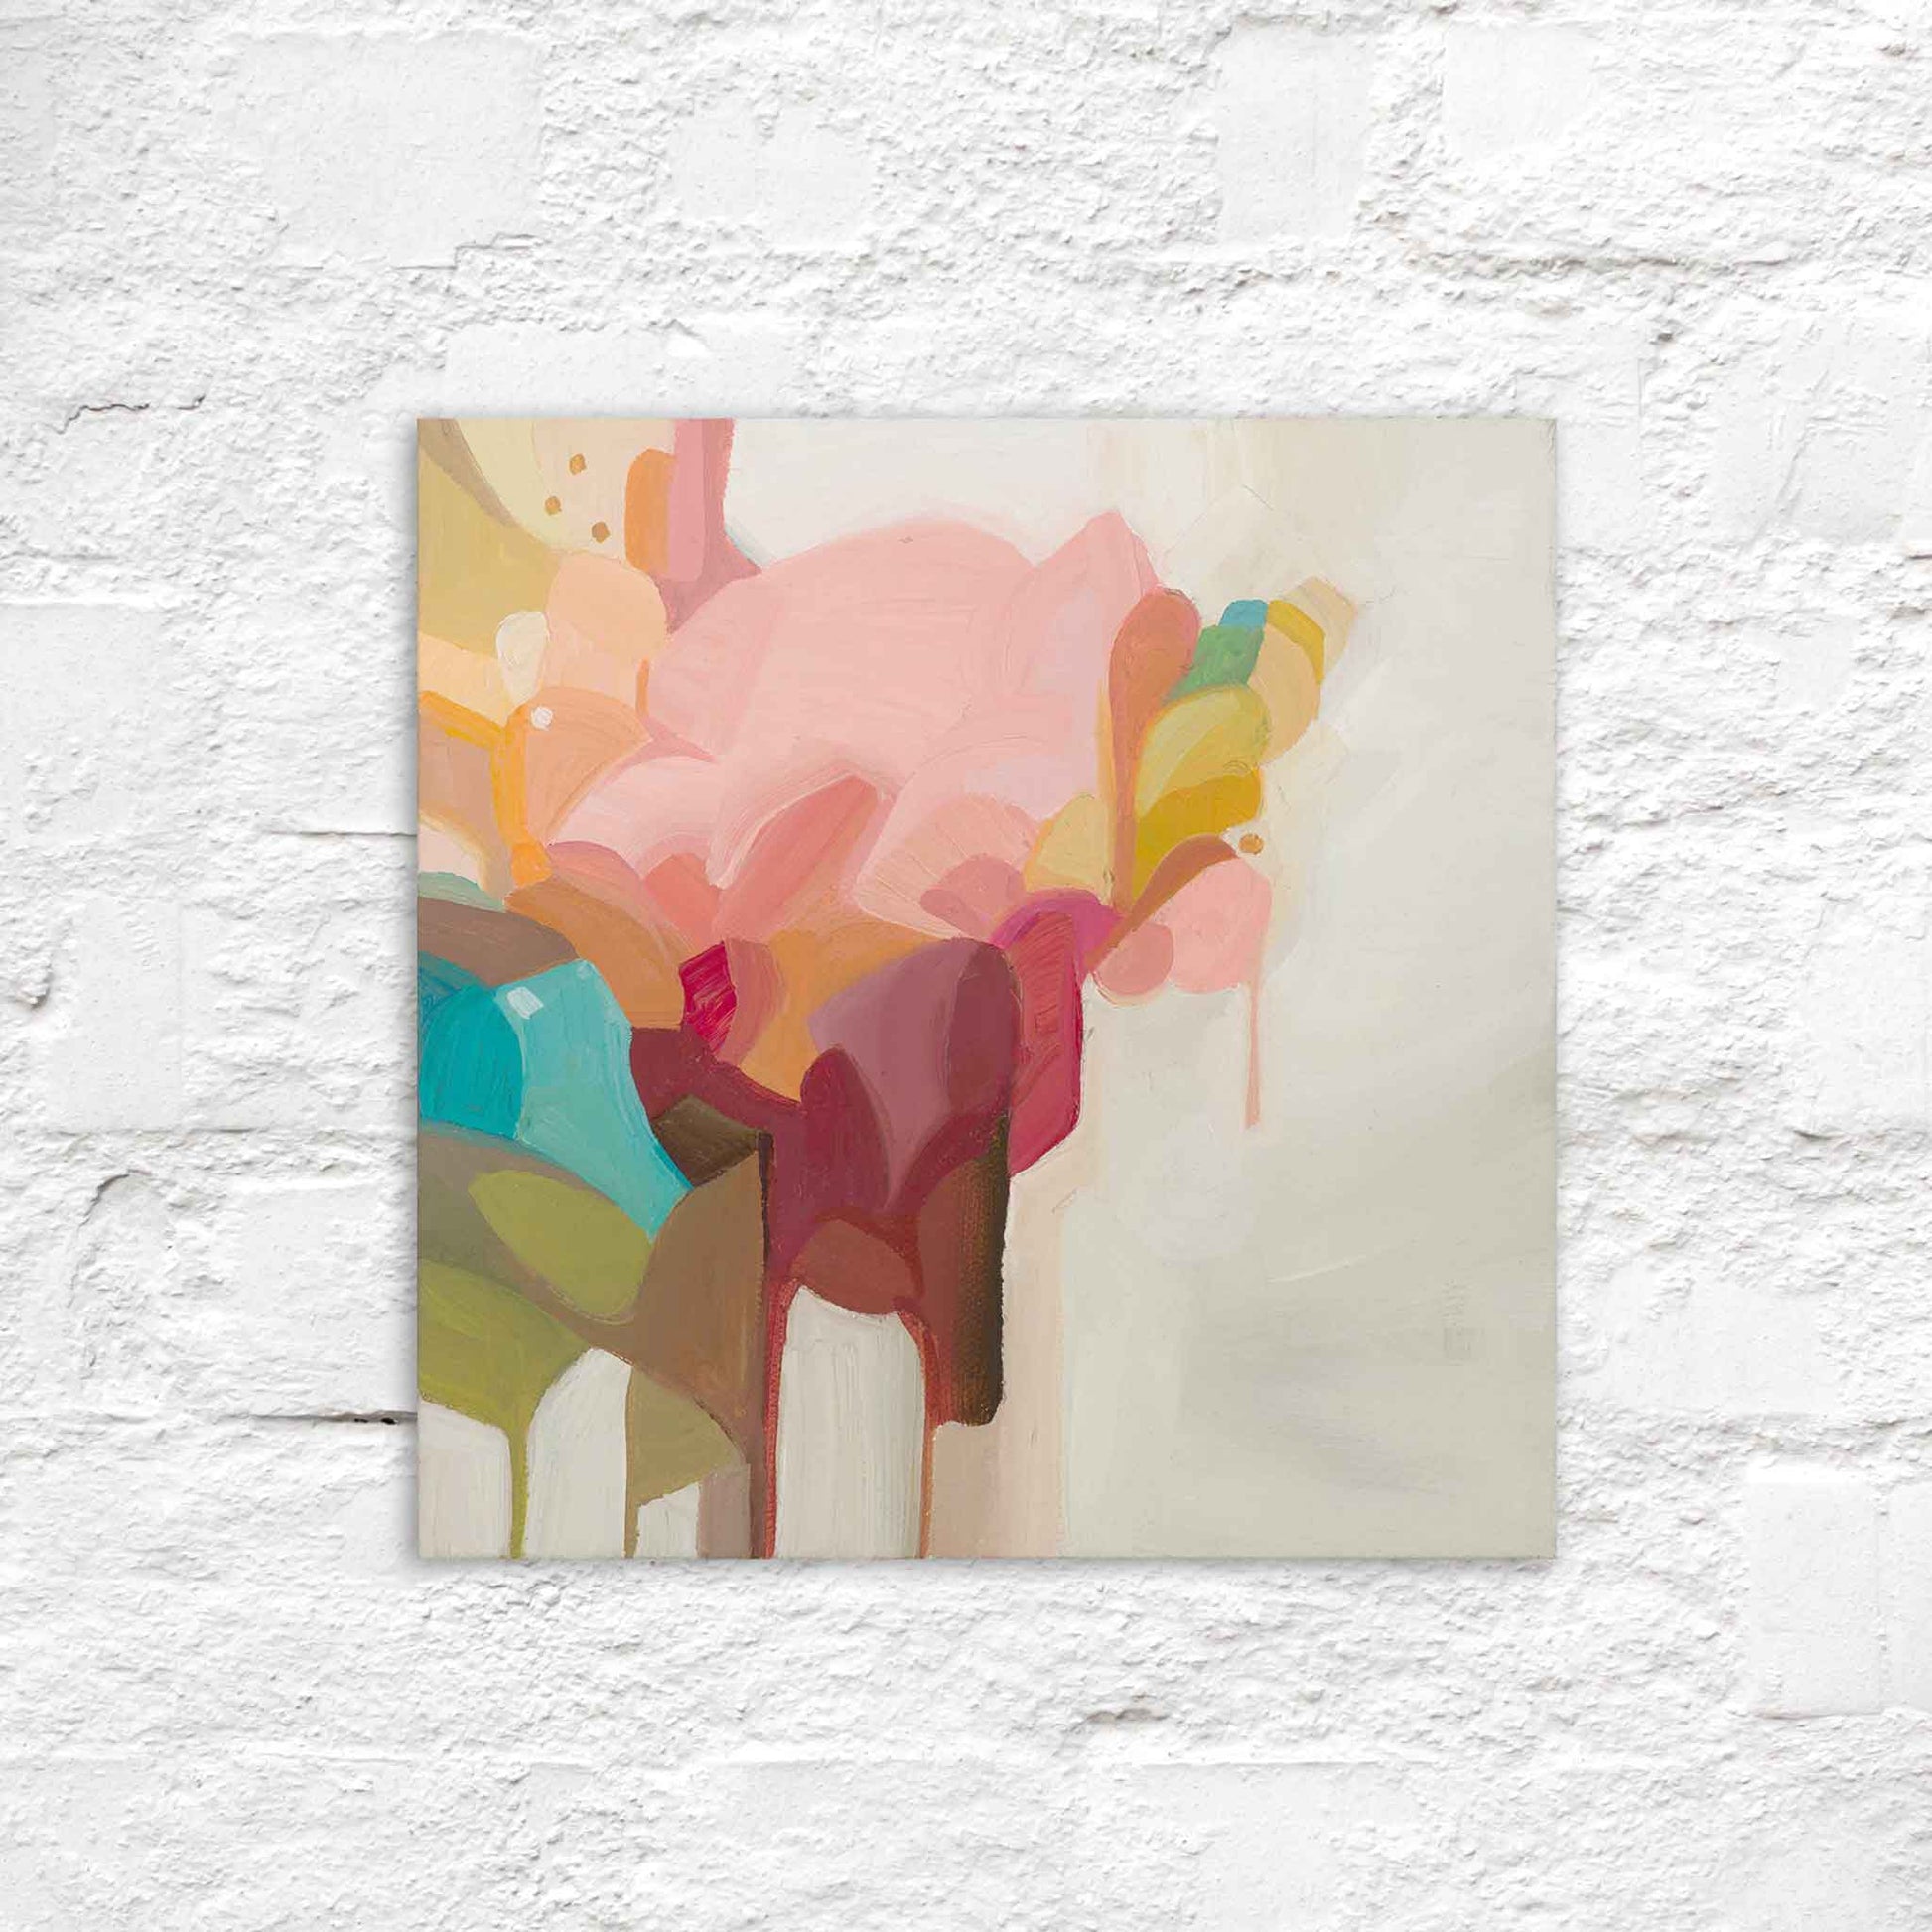 small square abstract oil painting on canvas in peach pink turquoise